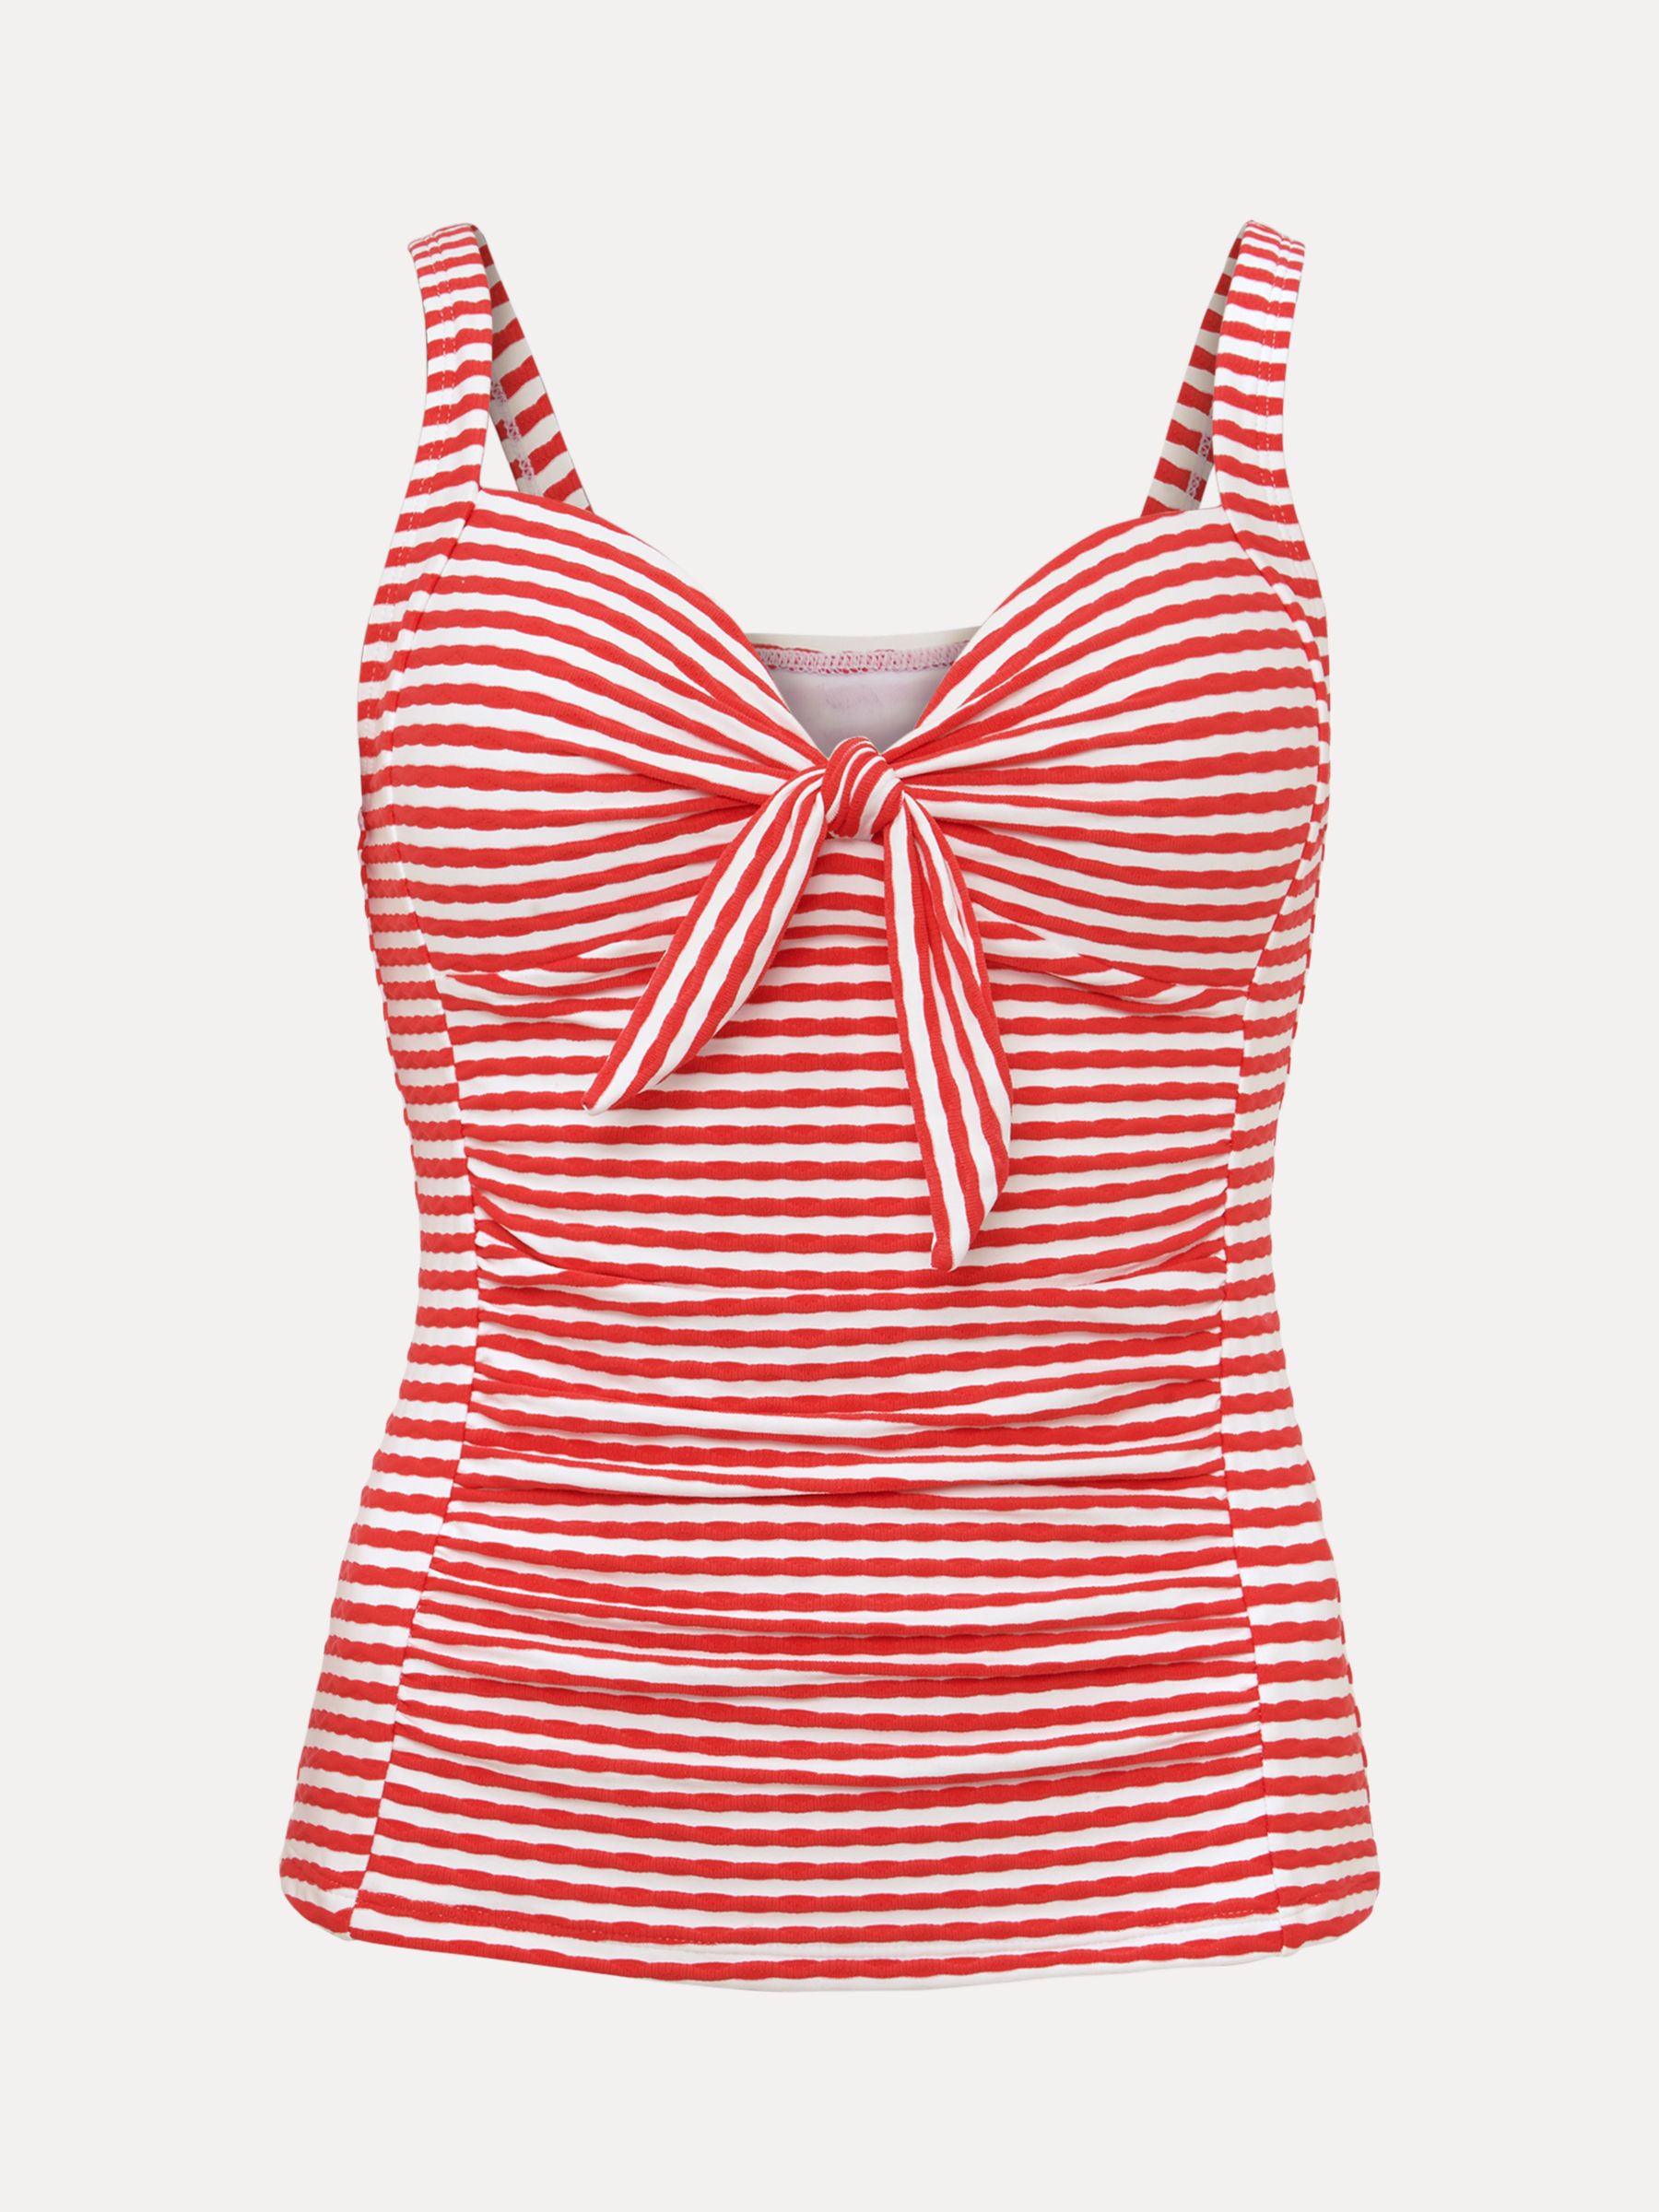 Buy Phase Eight Striped Tankini Top, Red/White Online at johnlewis.com